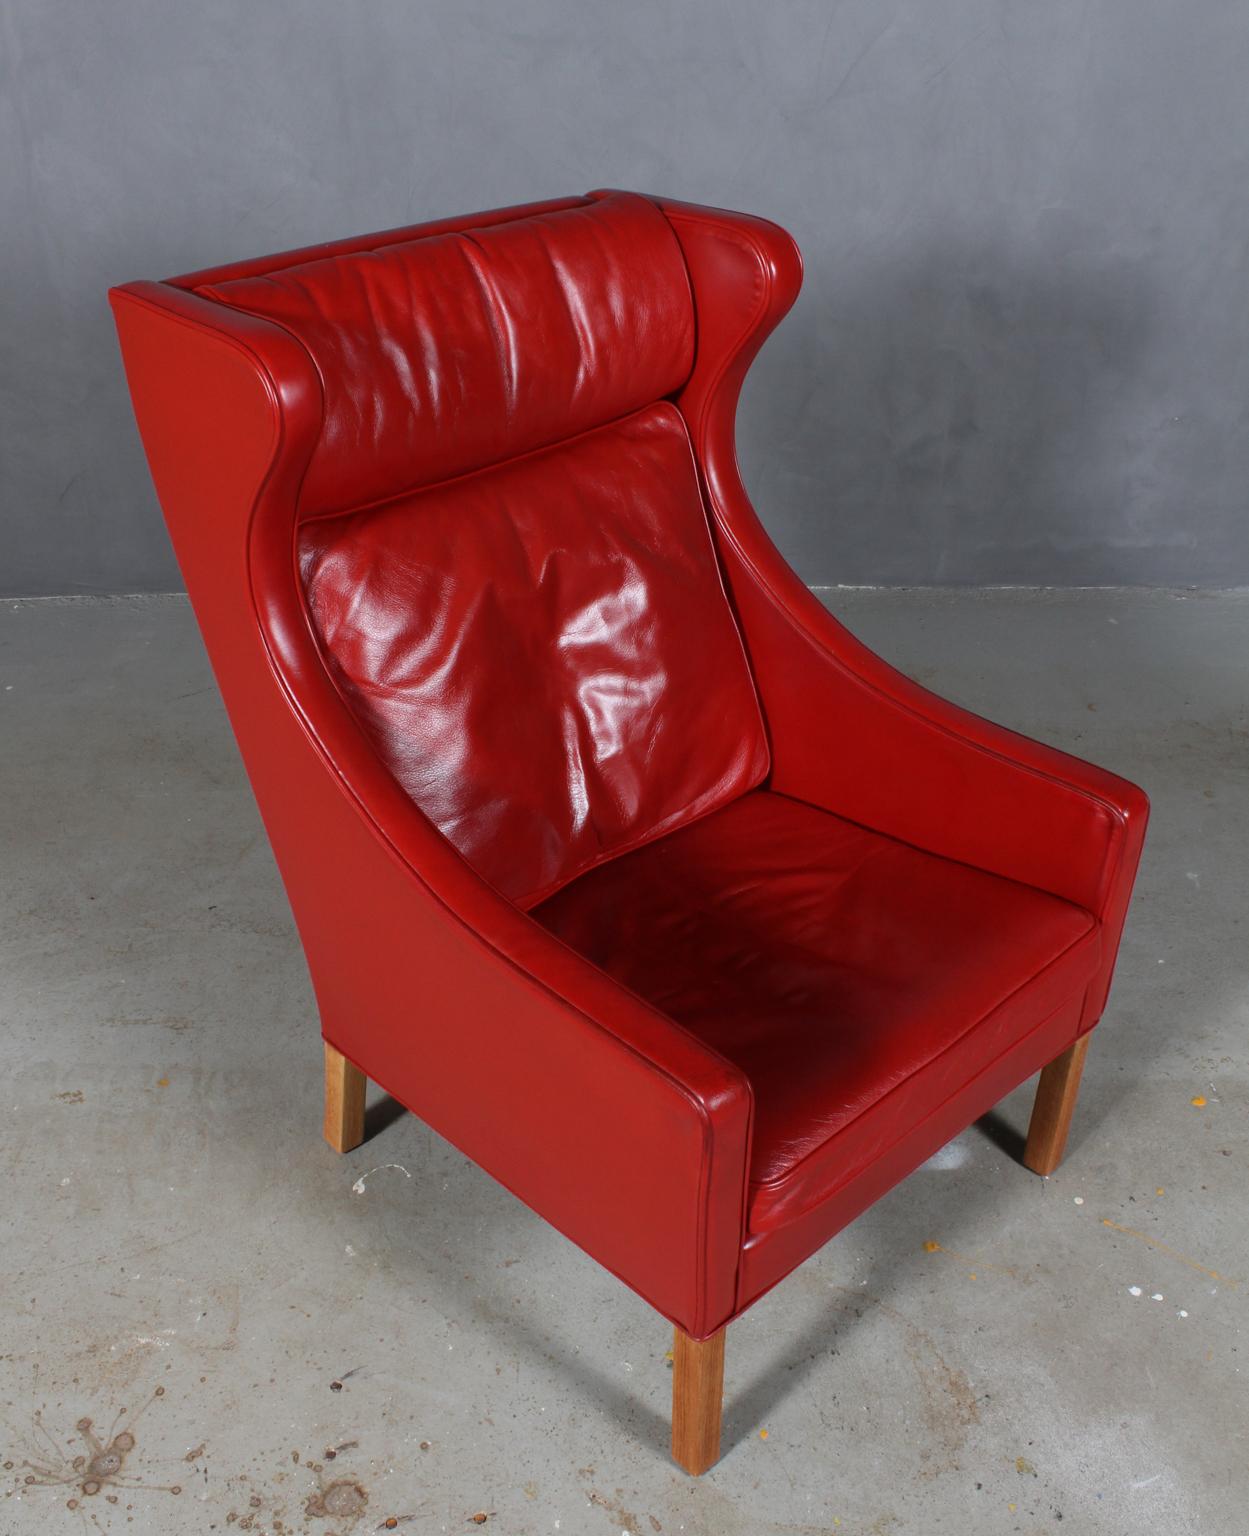 Børge Mogensen wingback chair in original red patinated leather upholstery.

Legs in oak.

Model 2204, made by Fredericia Furniture.